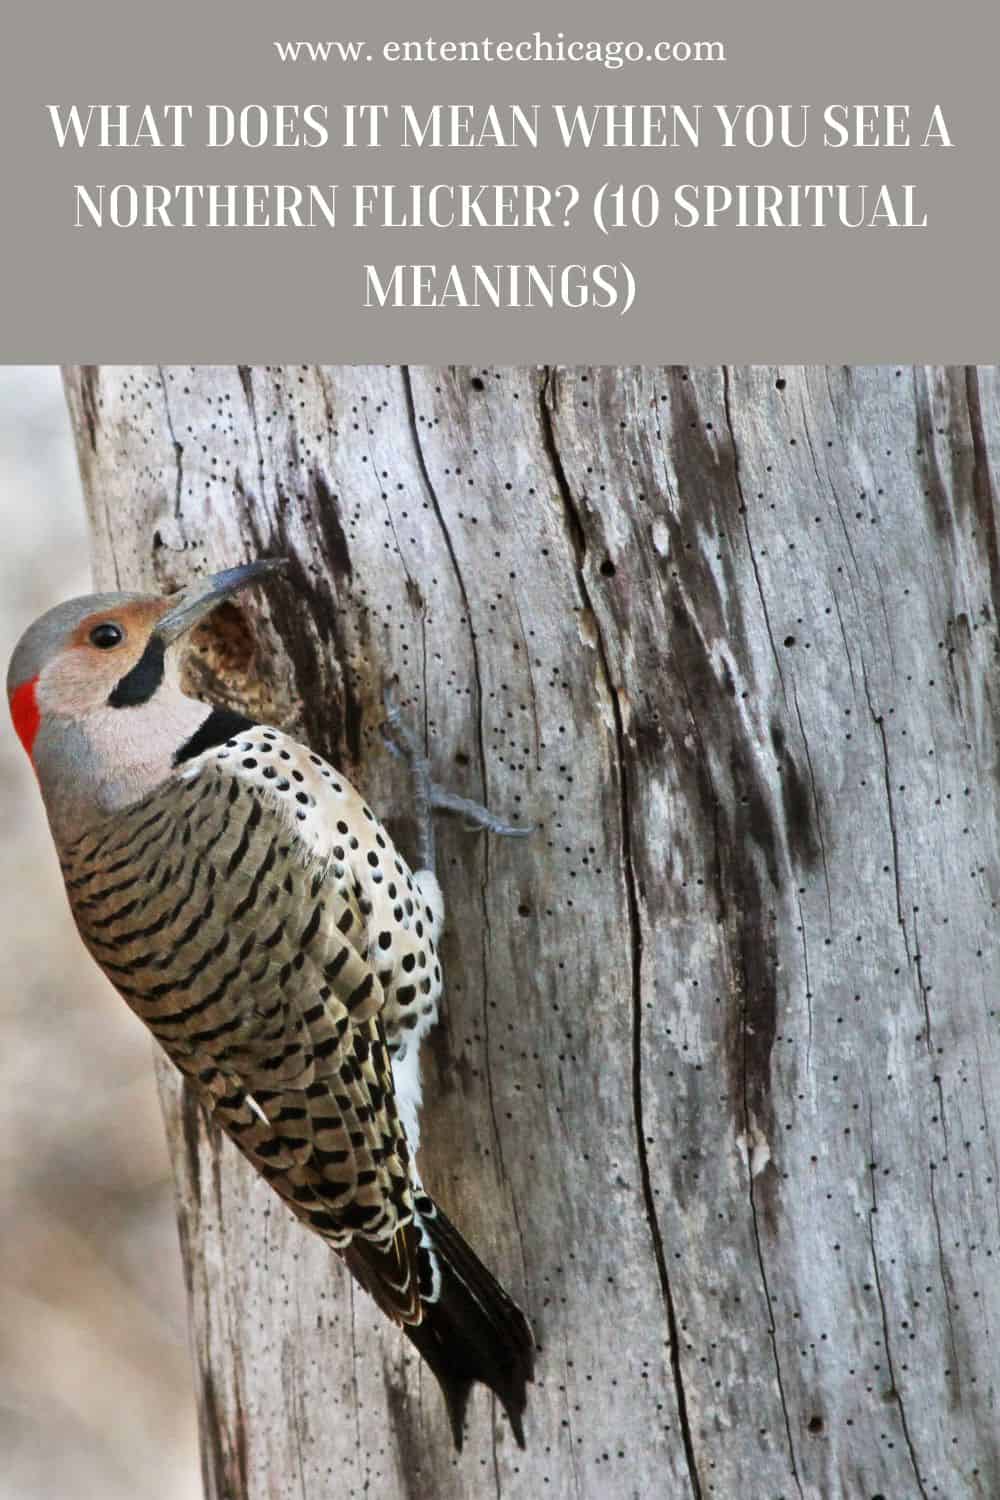 What Does It Mean When You See A Northern Flicker? (10 Spiritual Meanings)